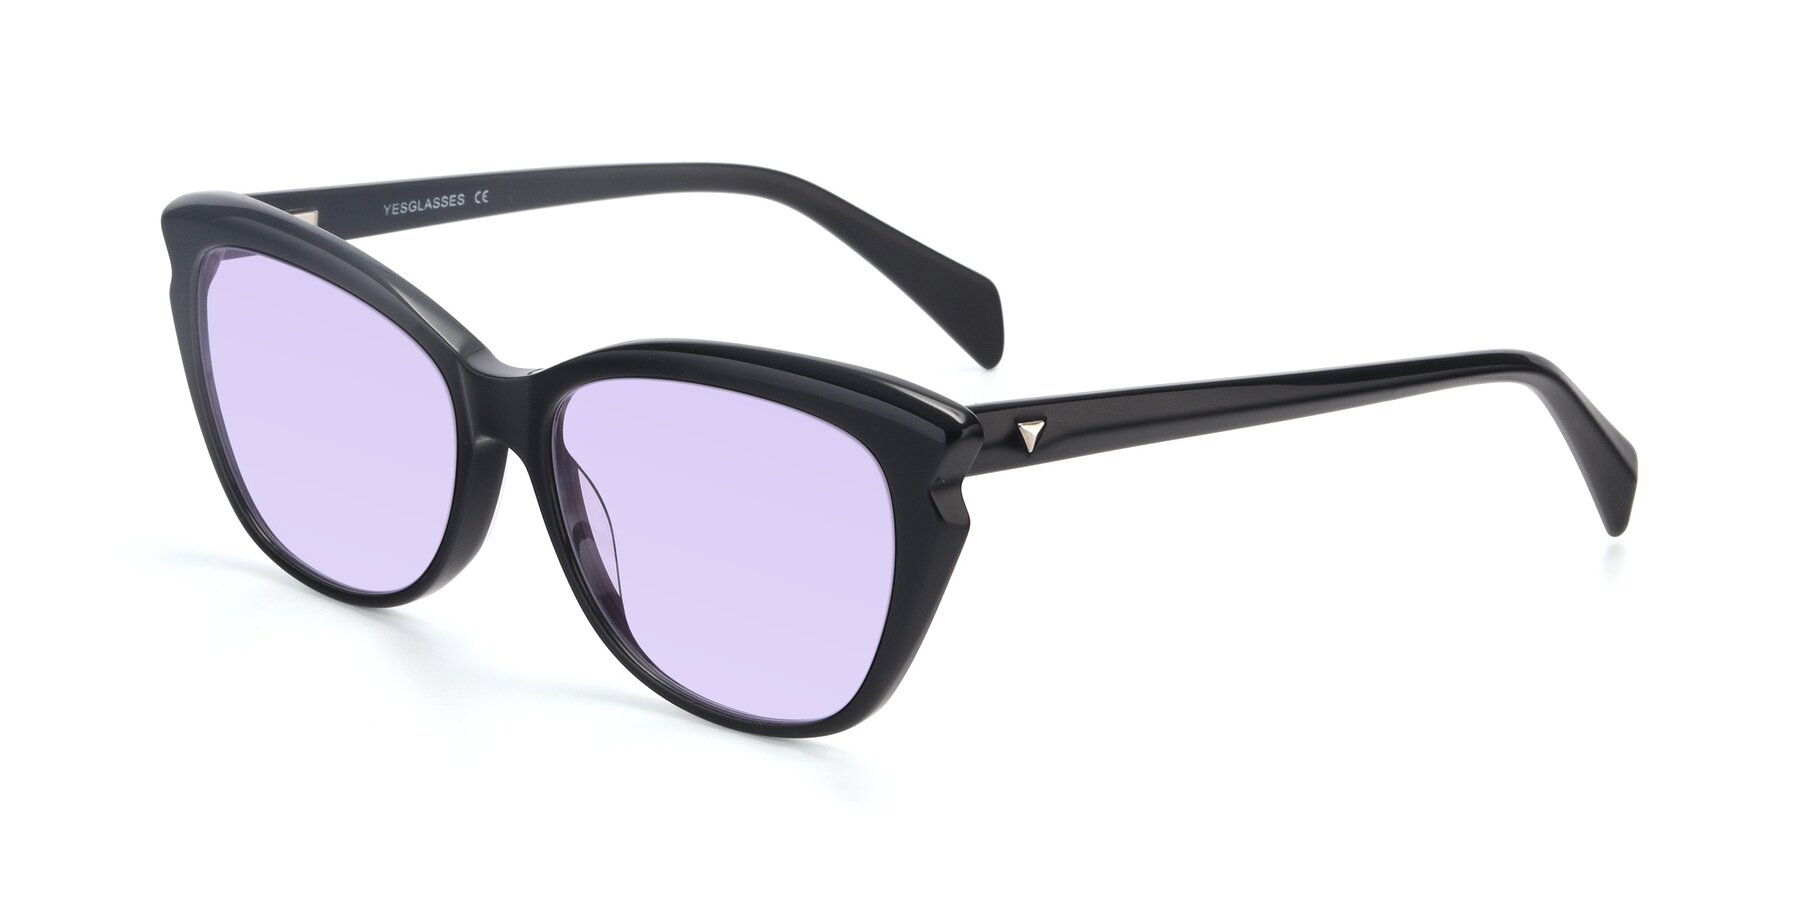 Angle of 17629 in Black with Light Purple Tinted Lenses